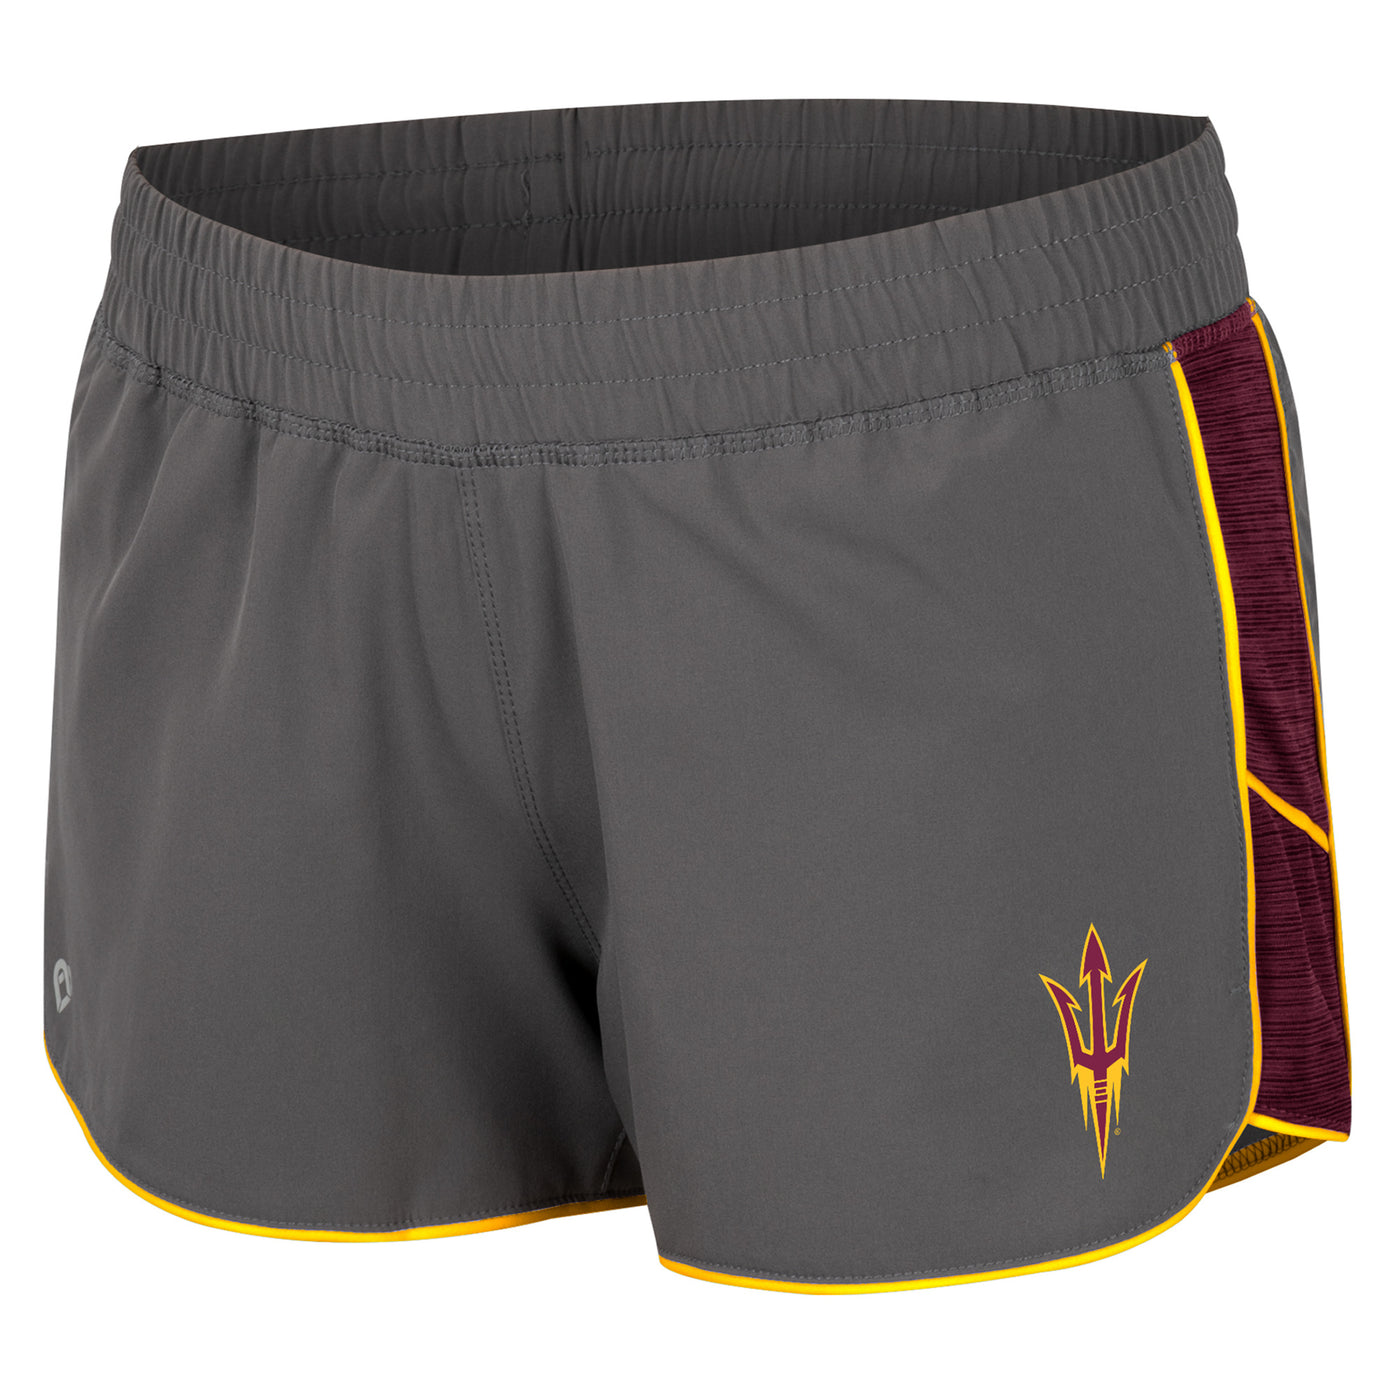 ASU gray shorts with maroon and gold side panels and a pitchfork on the left leg